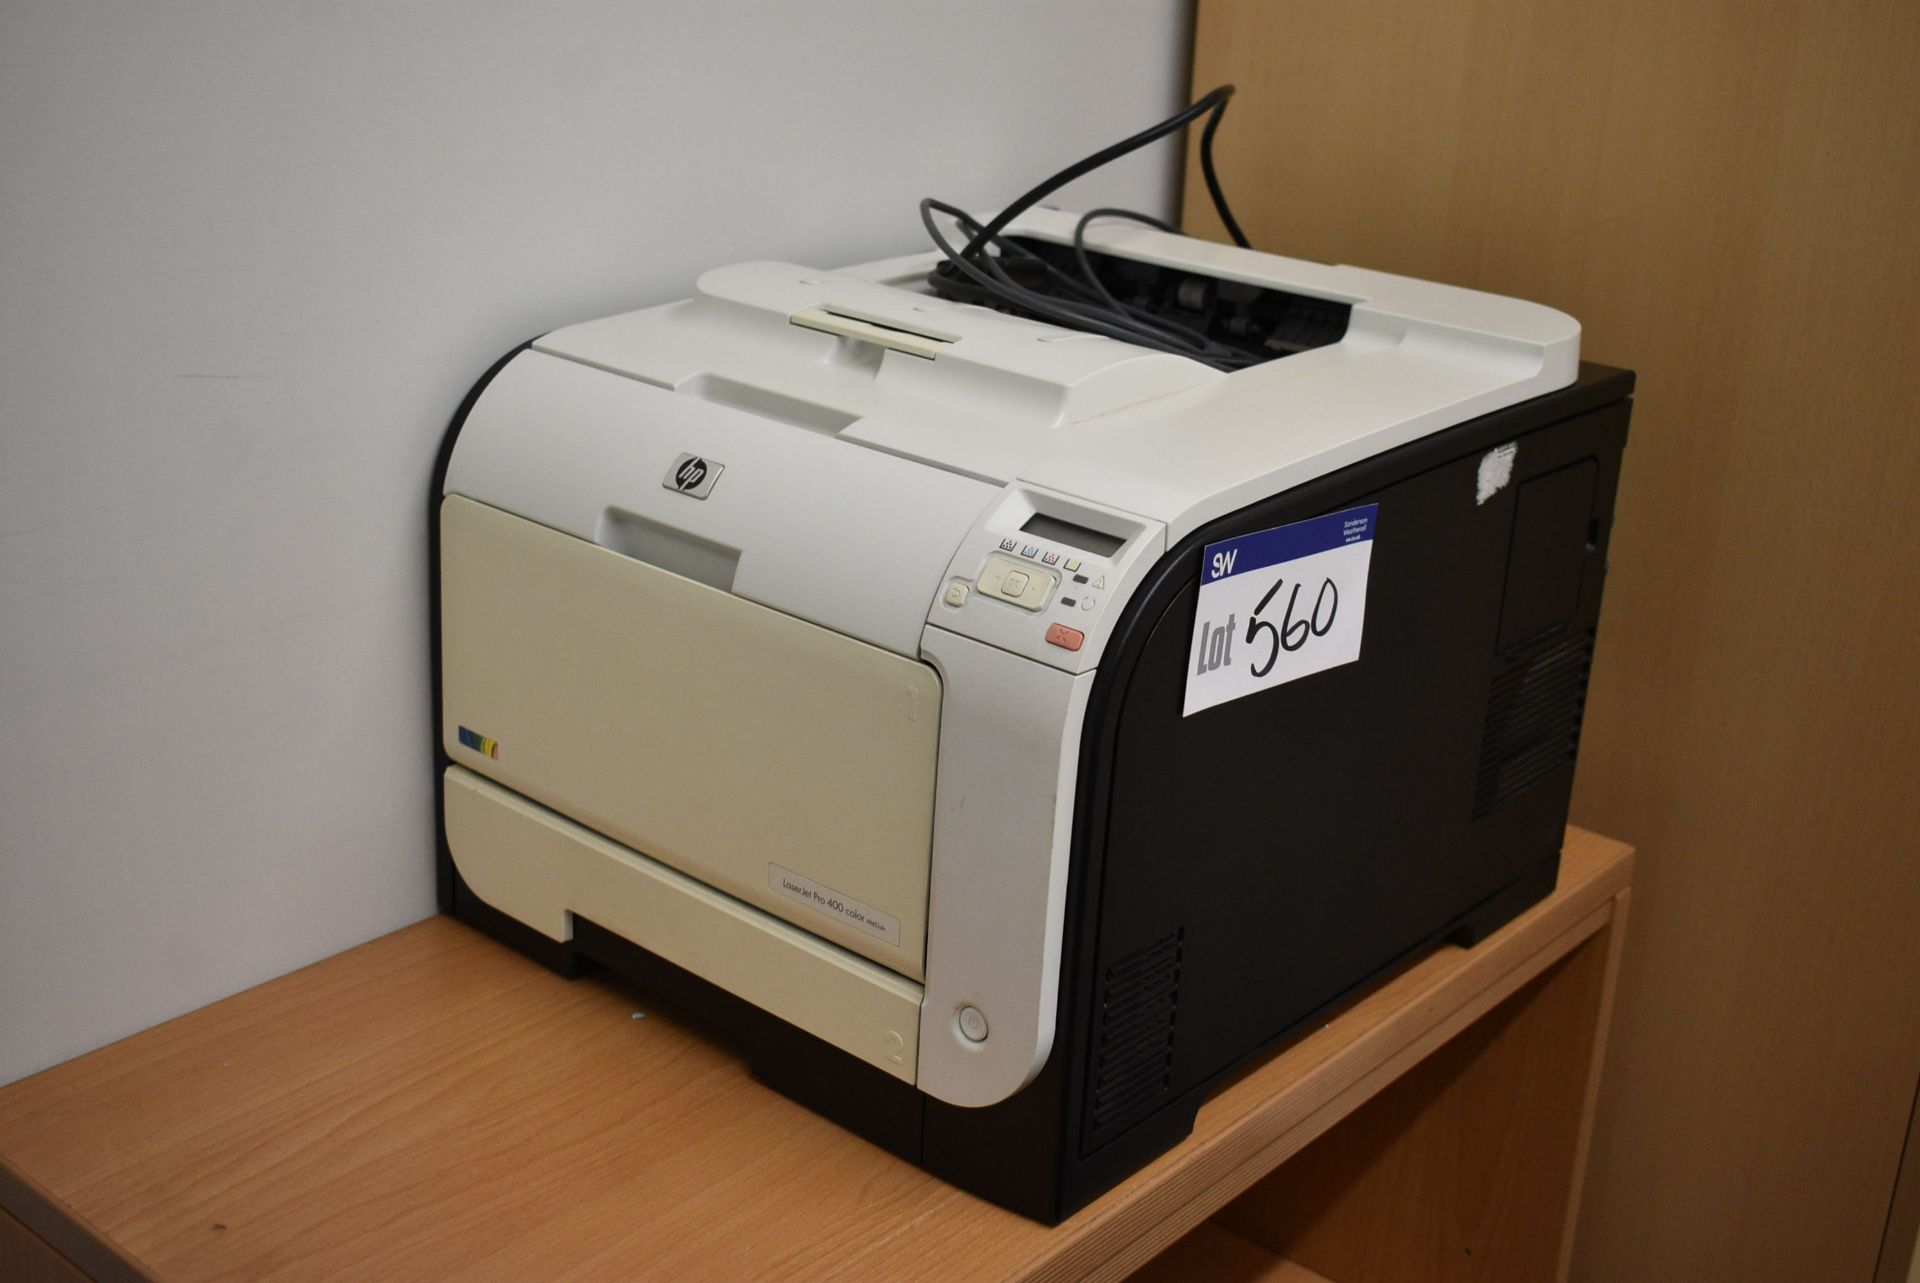 HP LaserJet Pro 400 color M451dn Printer, with thr - Image 2 of 4